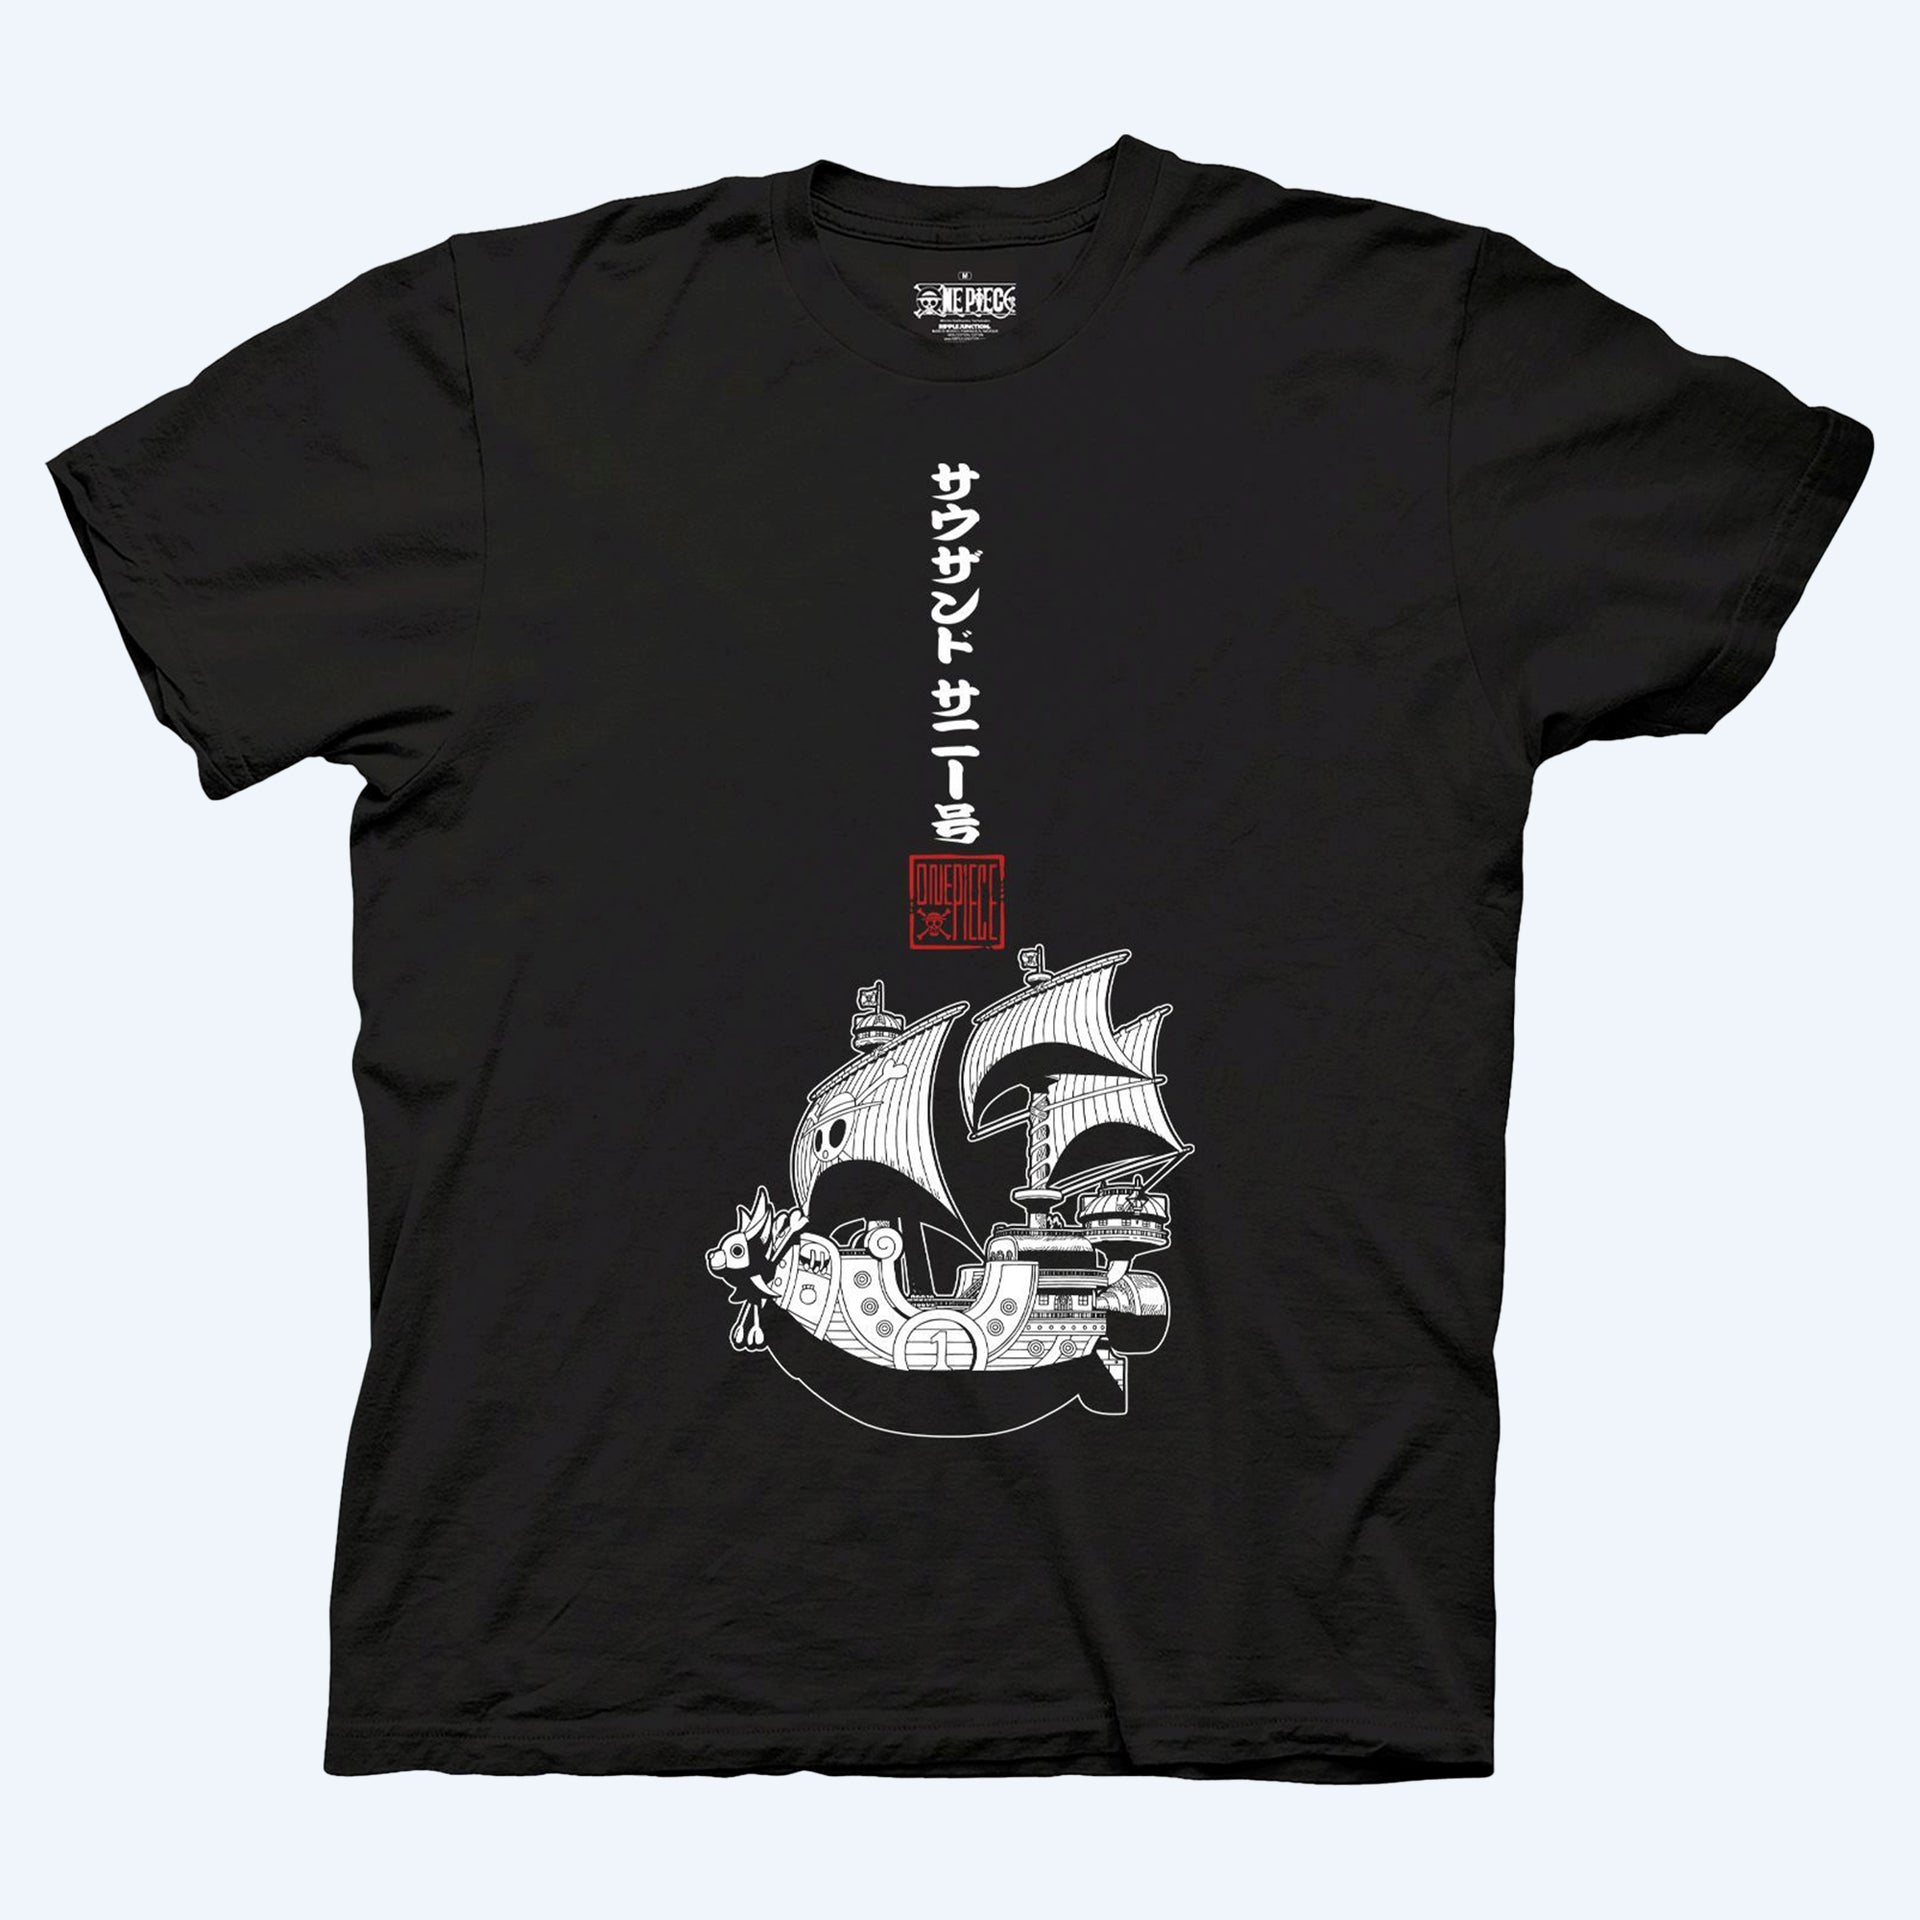 The Thousand Sunny Ship One Piece T-Shirt